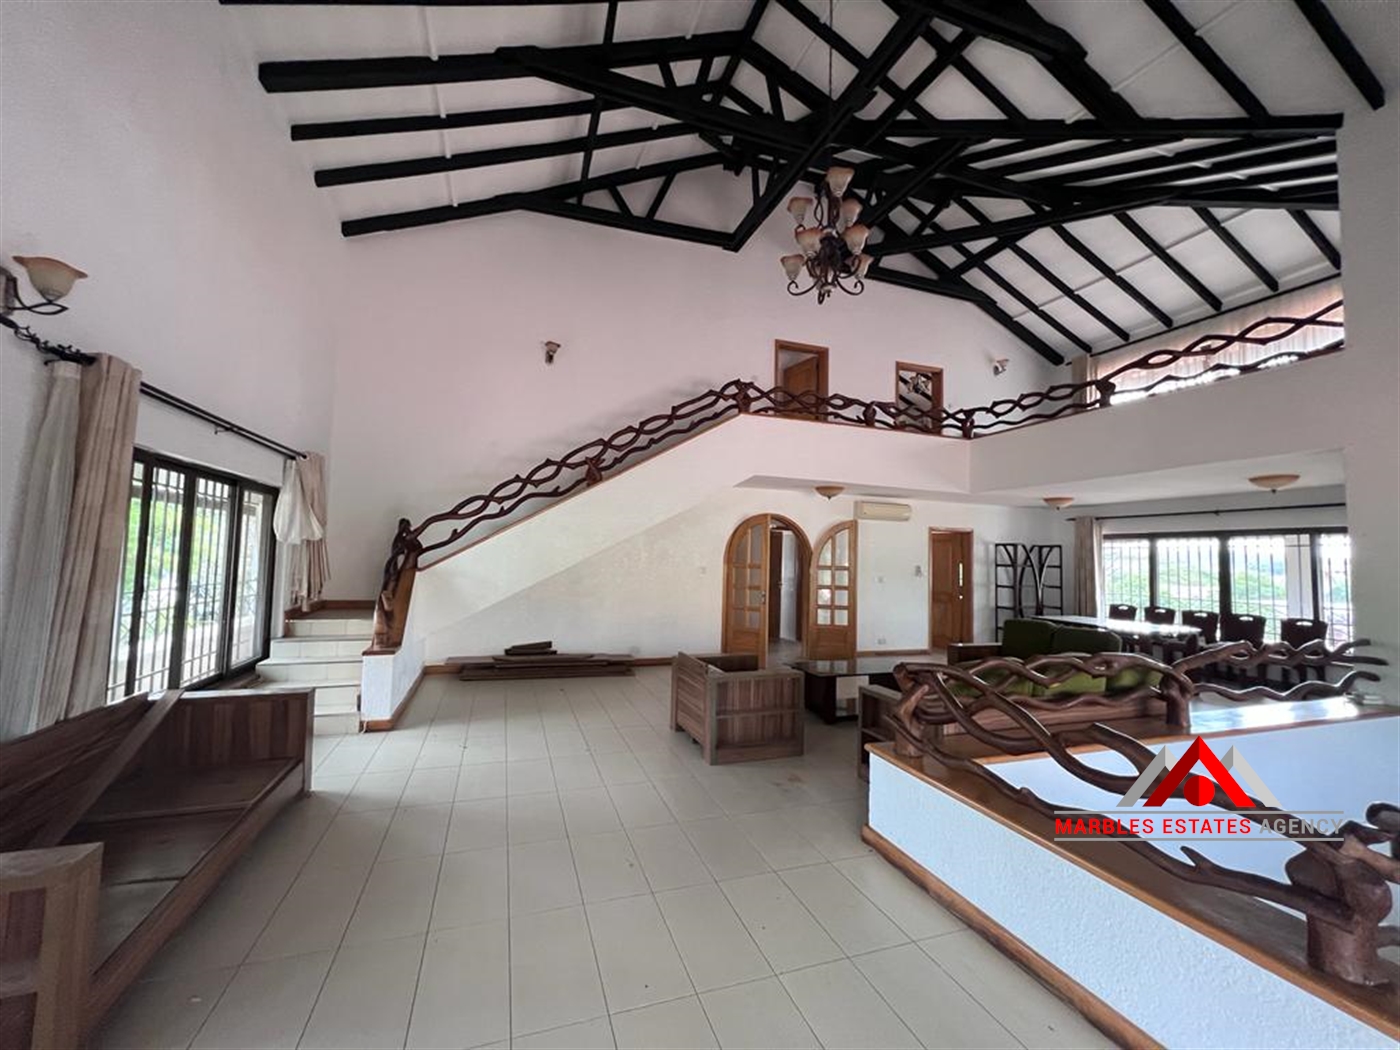 Penthouse for rent in Bugoloobi Kampala